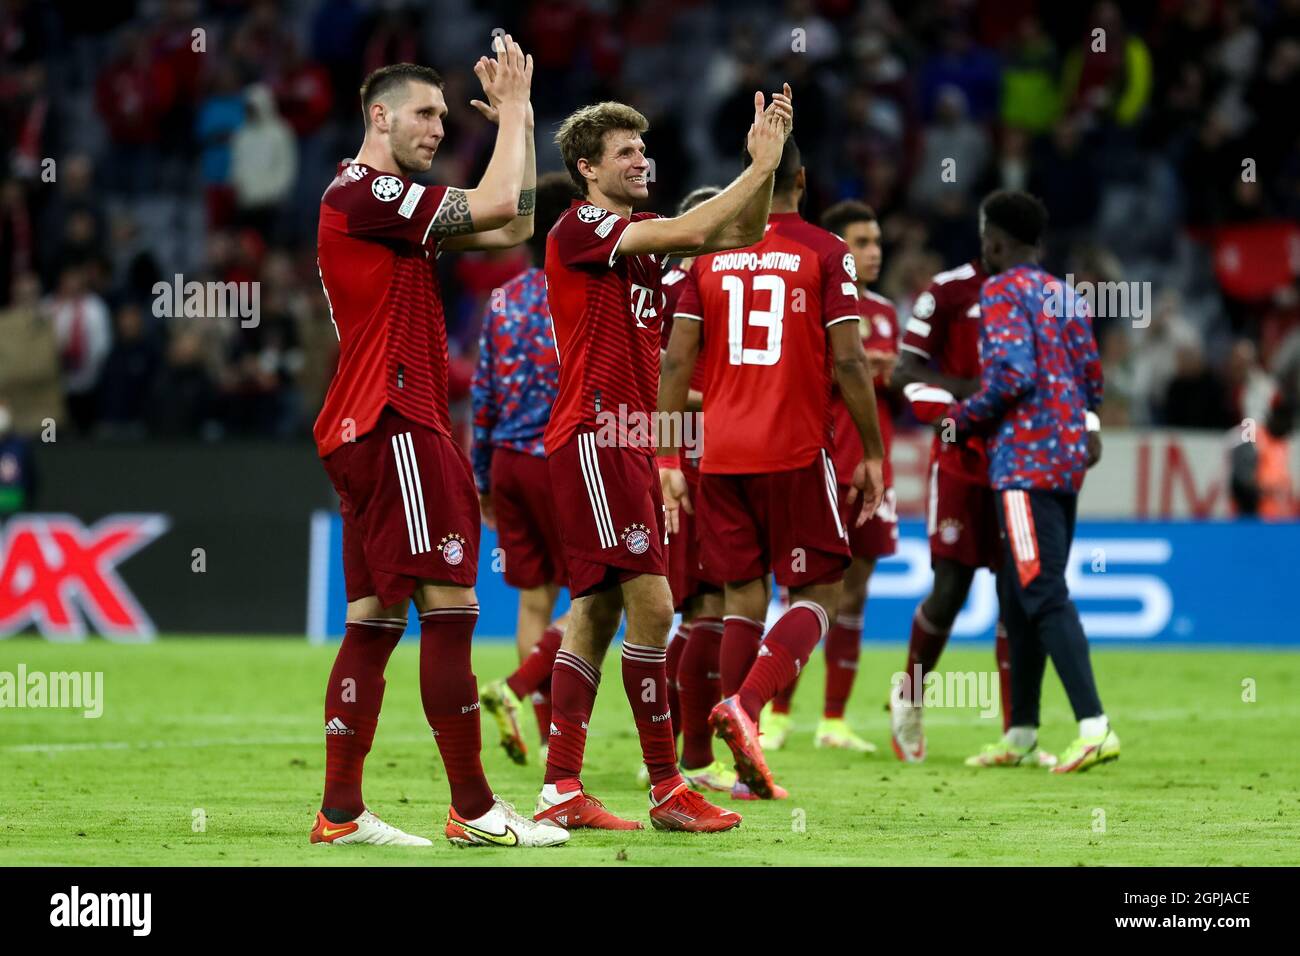 MUNICH, GERMANY - SEPTEMBER 29: Thomas Muller of FC Bayern Munchen  celebrates his sides win during the UEFA Champions League Group Stage match  between Bayern Munchen and Dinamo Kiev at the Allianz